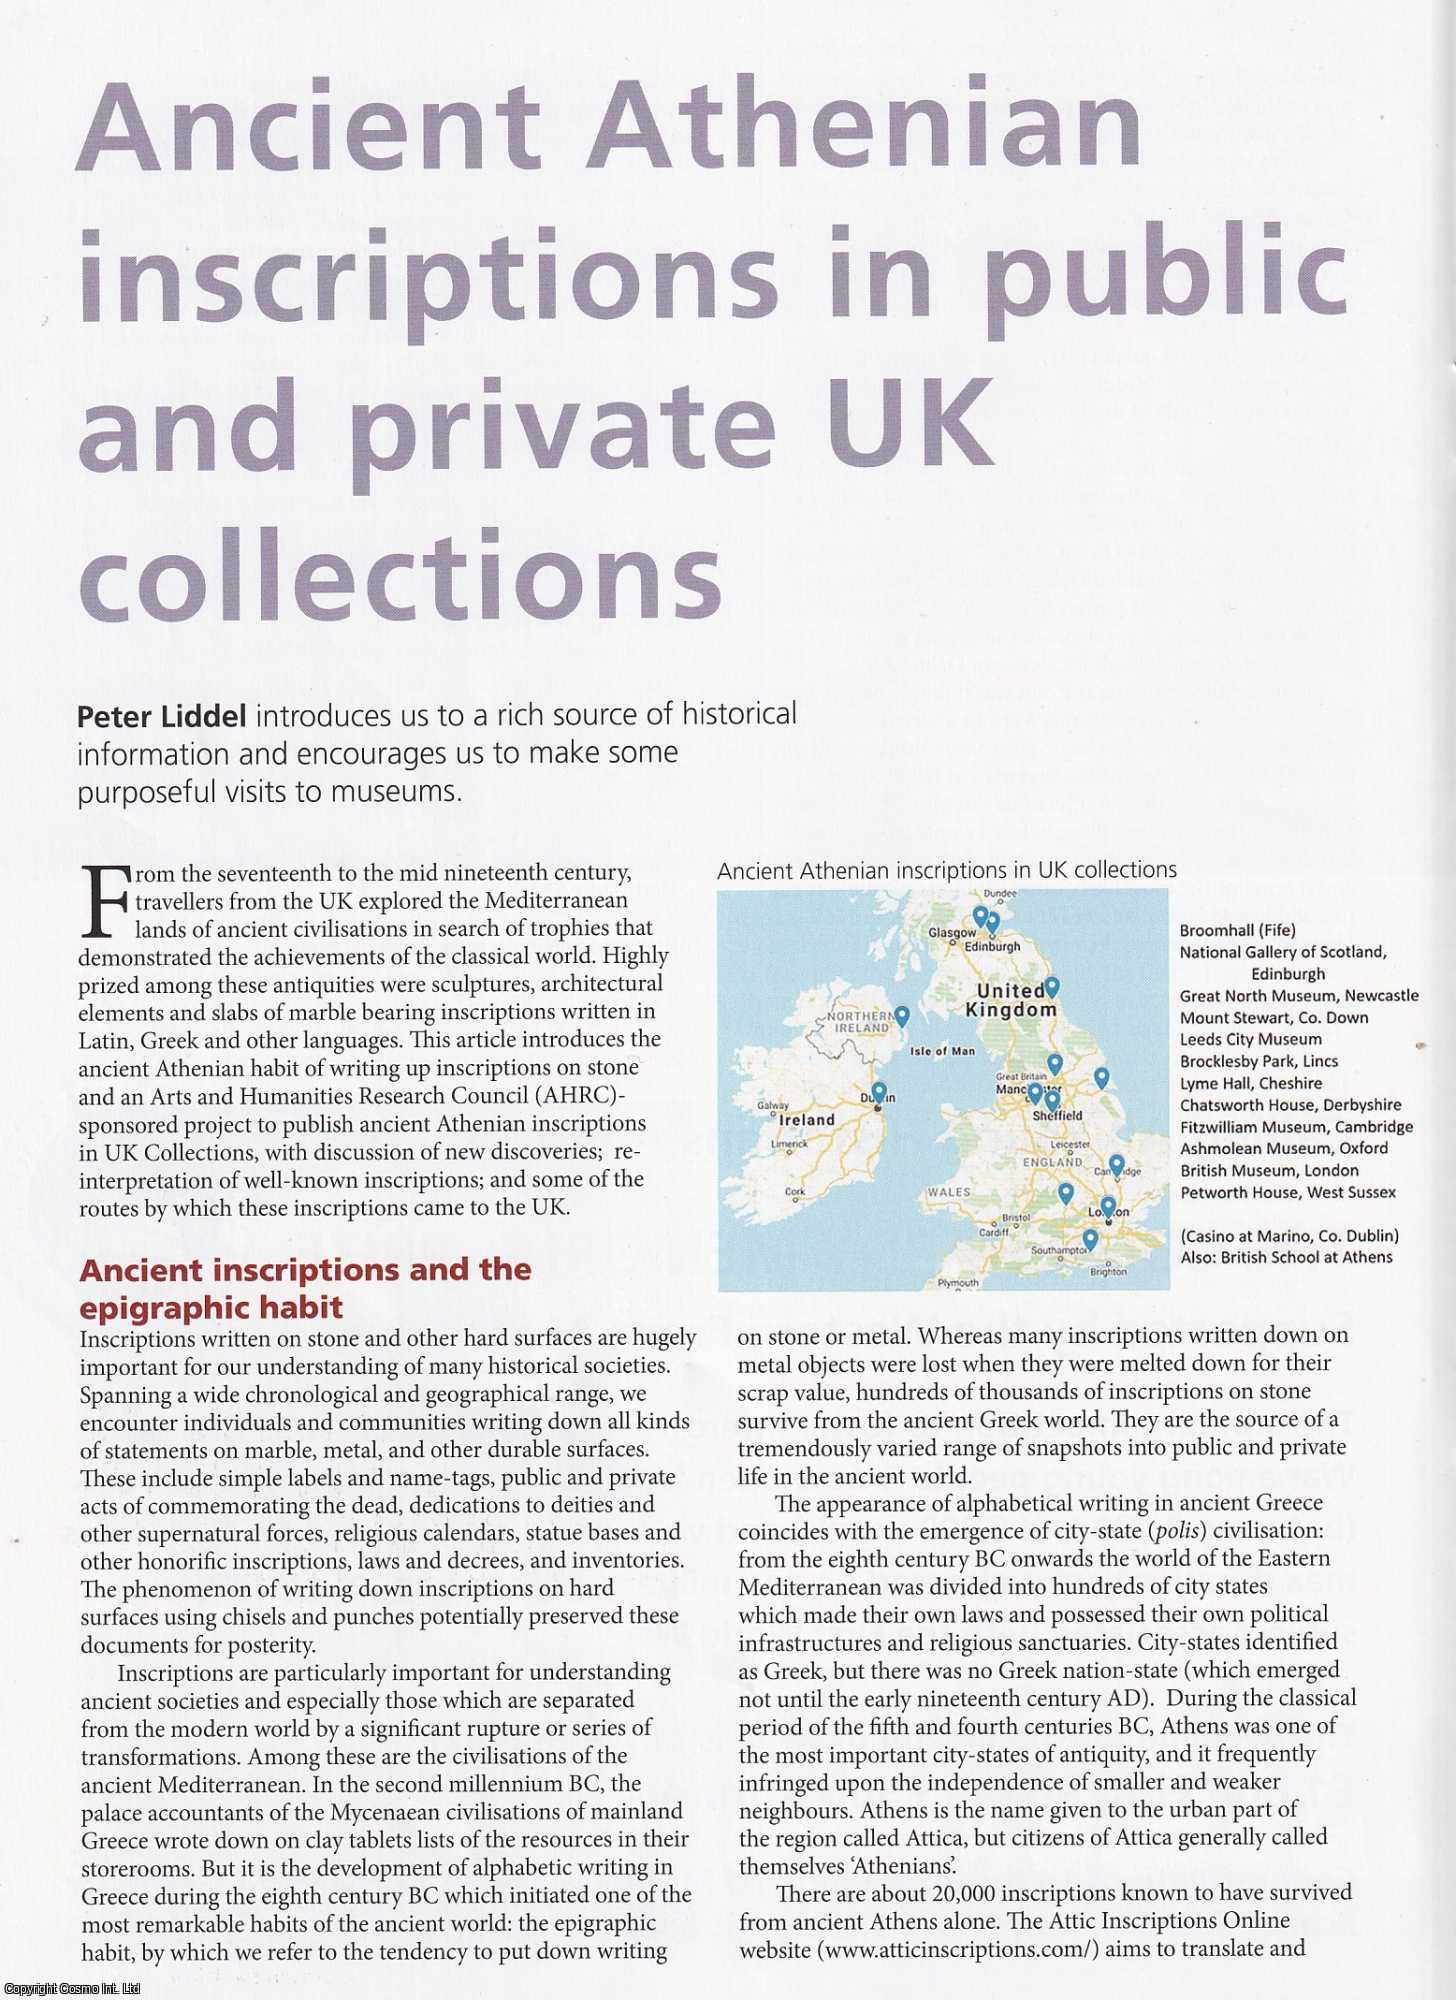 Peter Liddel - Ancient Athenian Inscriptions in Public and Private UK Collections. An original article from Historian, the magazine of The Historical Association, 2021.